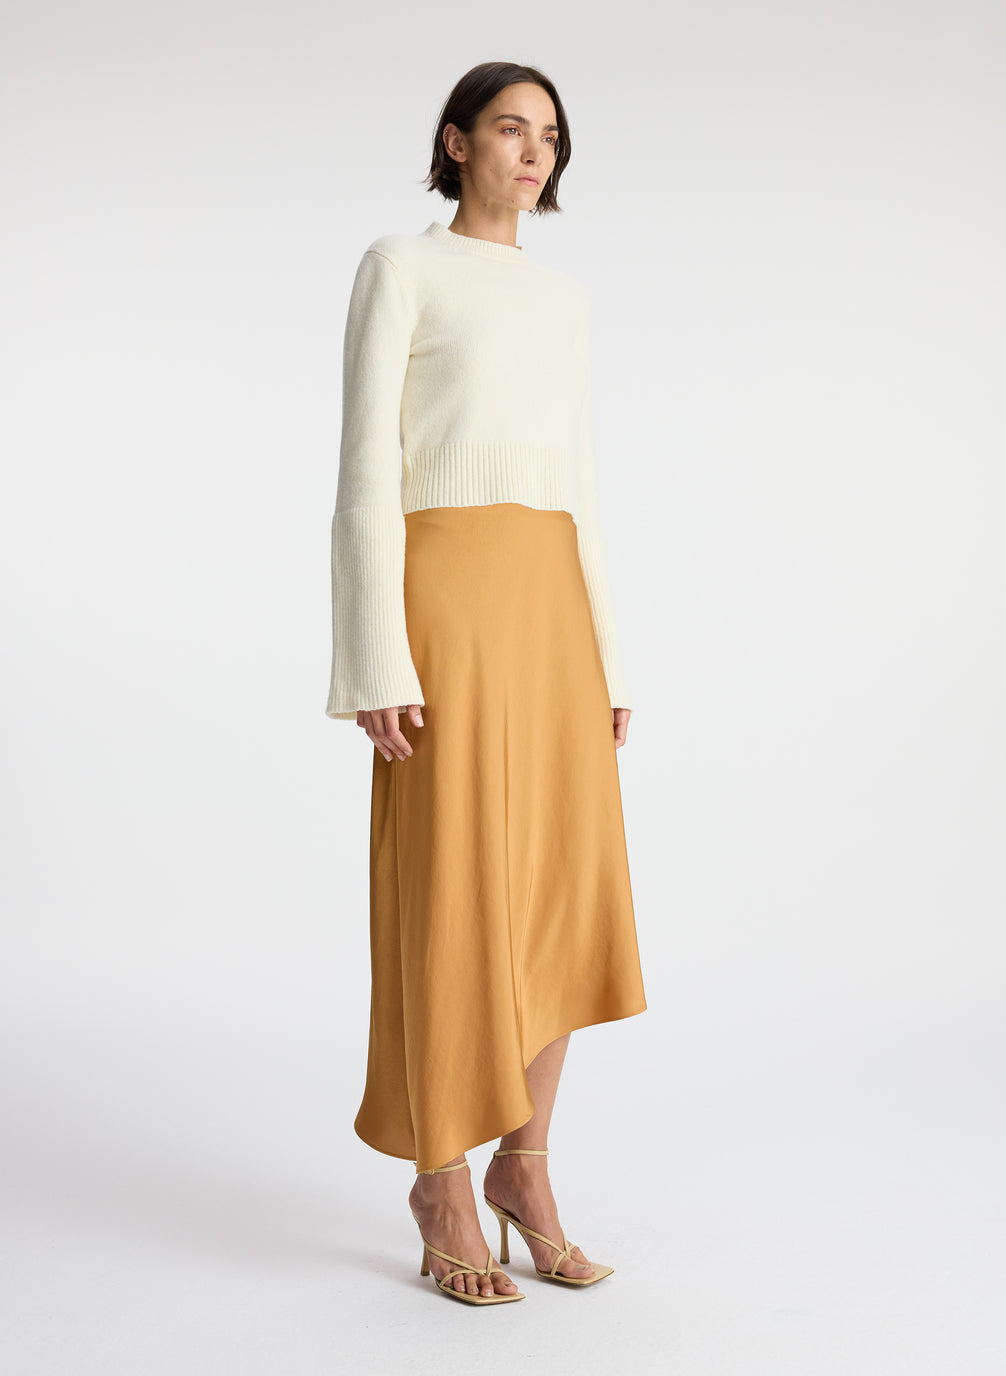 side view of woman wearing white sweater and brown satin asymmetric midi skirt